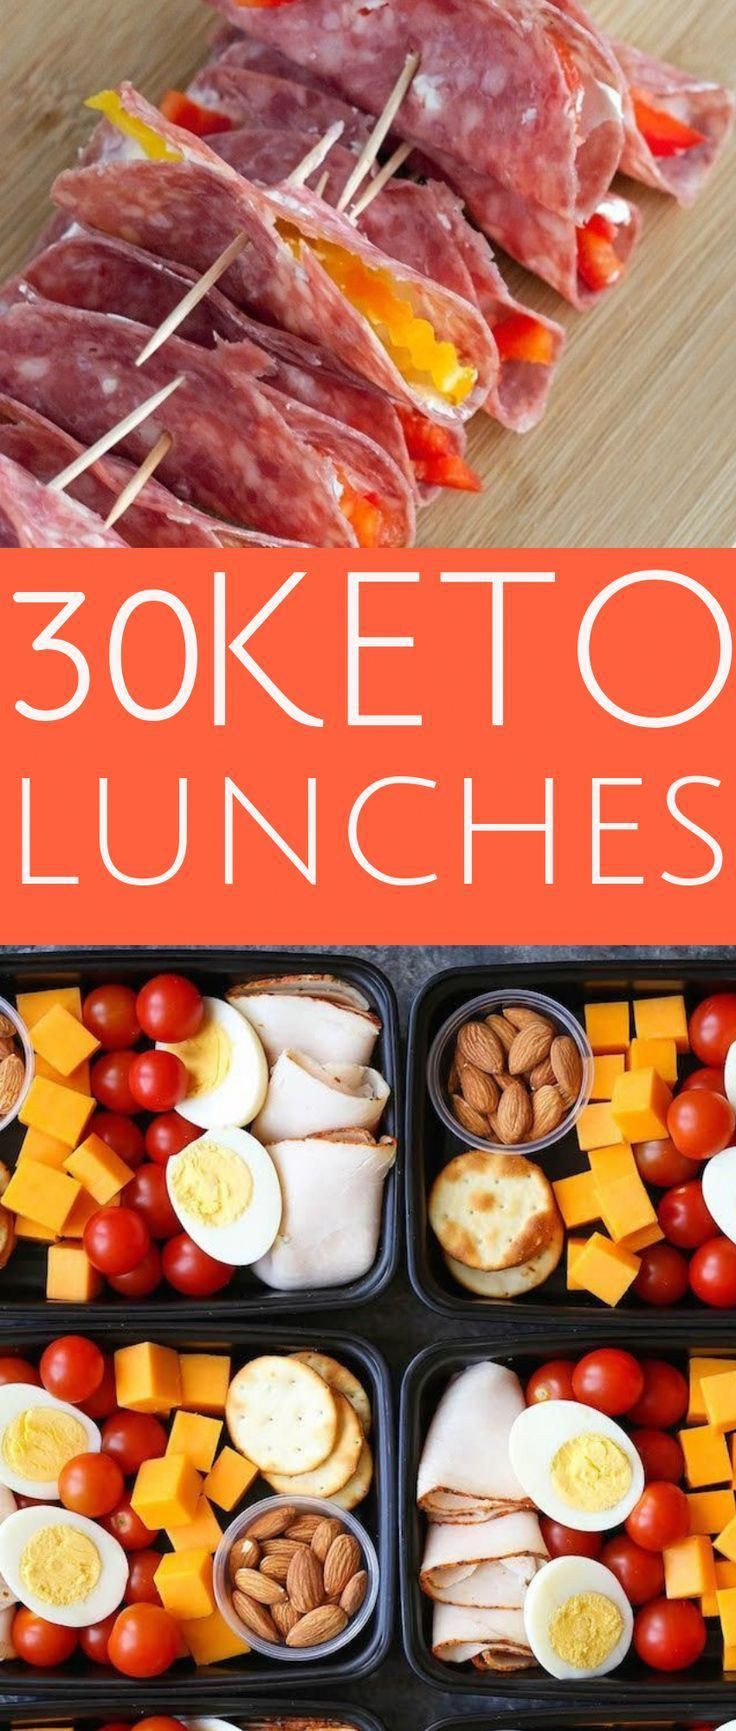 Clean Keto Lunches For Work
 20 Keto Lunch Ideas for Work in 2019